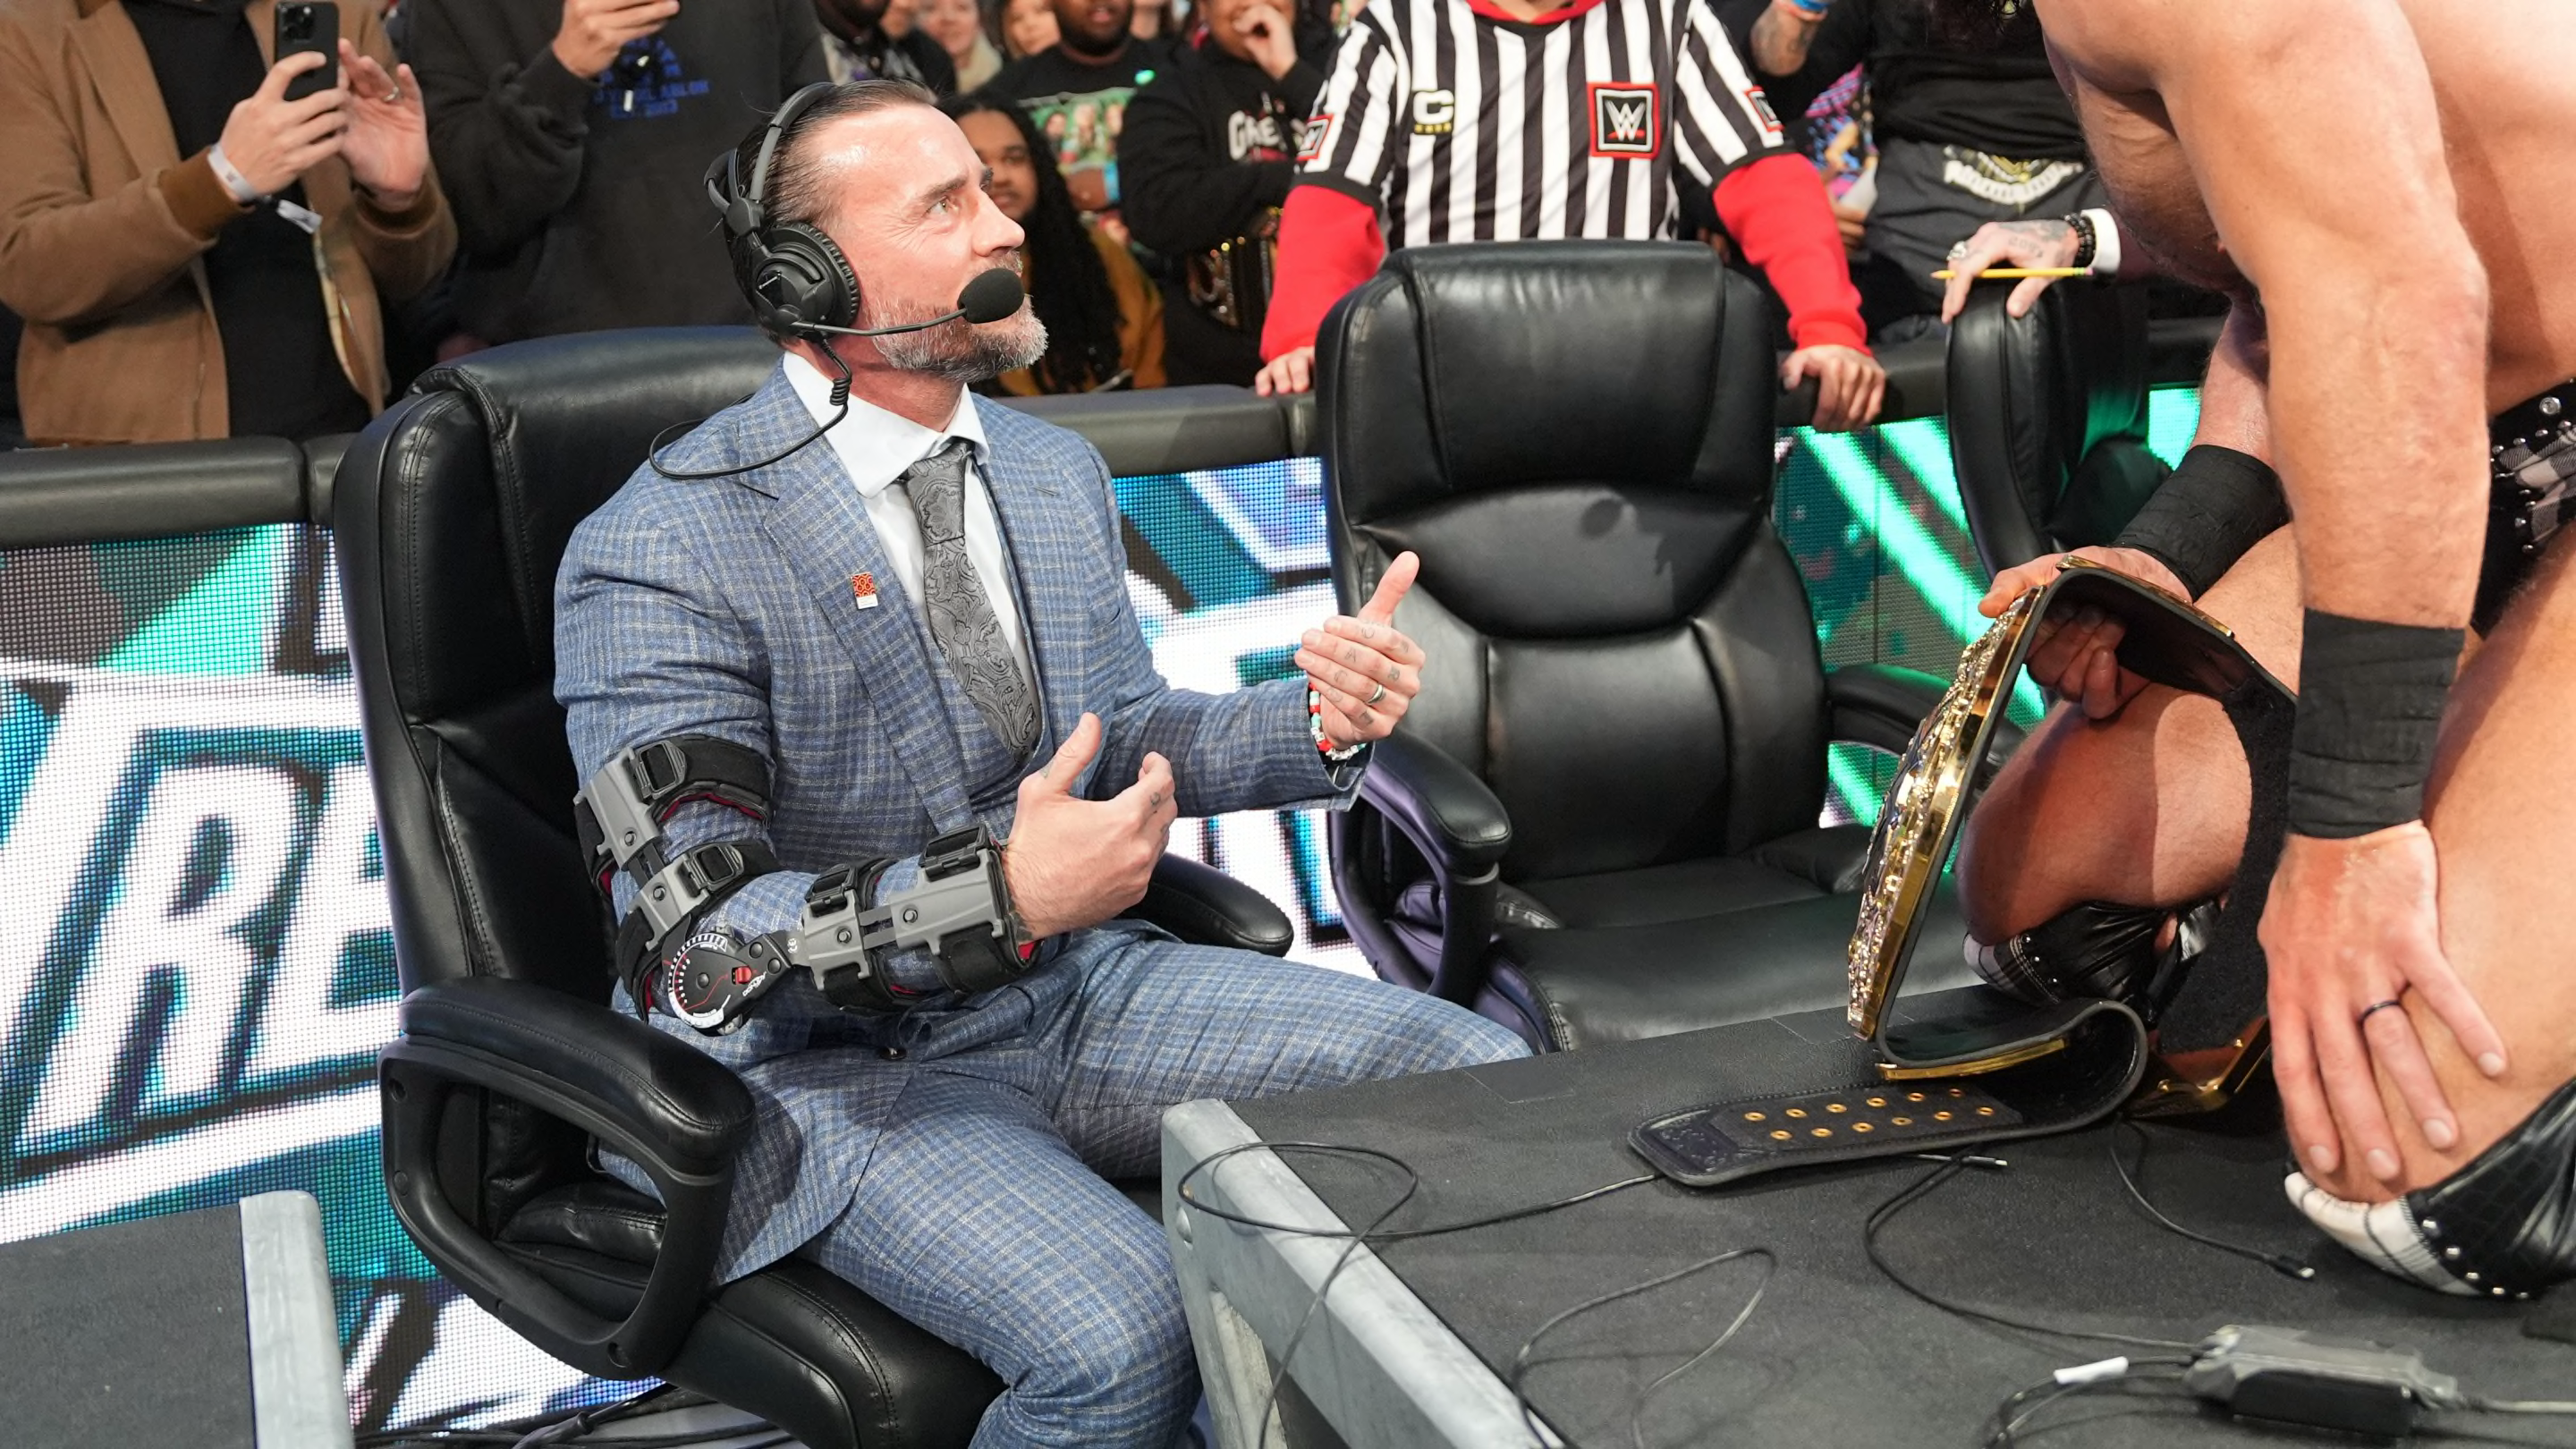 AEW's Decision to Air Footage of CM Punk Choking Jack Perry Totally
Backfired